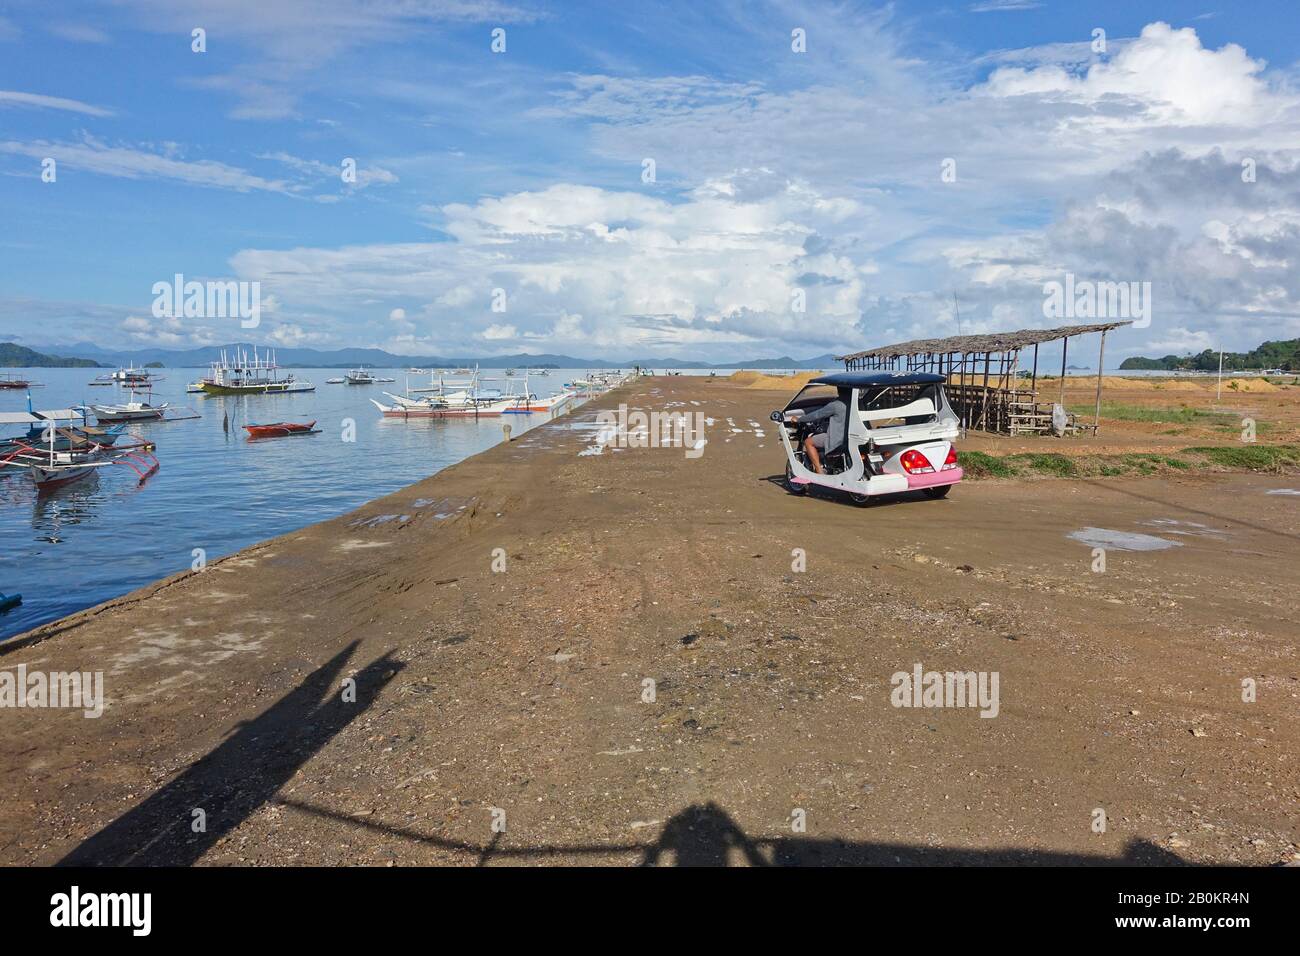 San Vicente island, is an emerging resort city in Palawan. Tourists visit the still underdeveloped areas for the beaches and marine life. Stock Photo